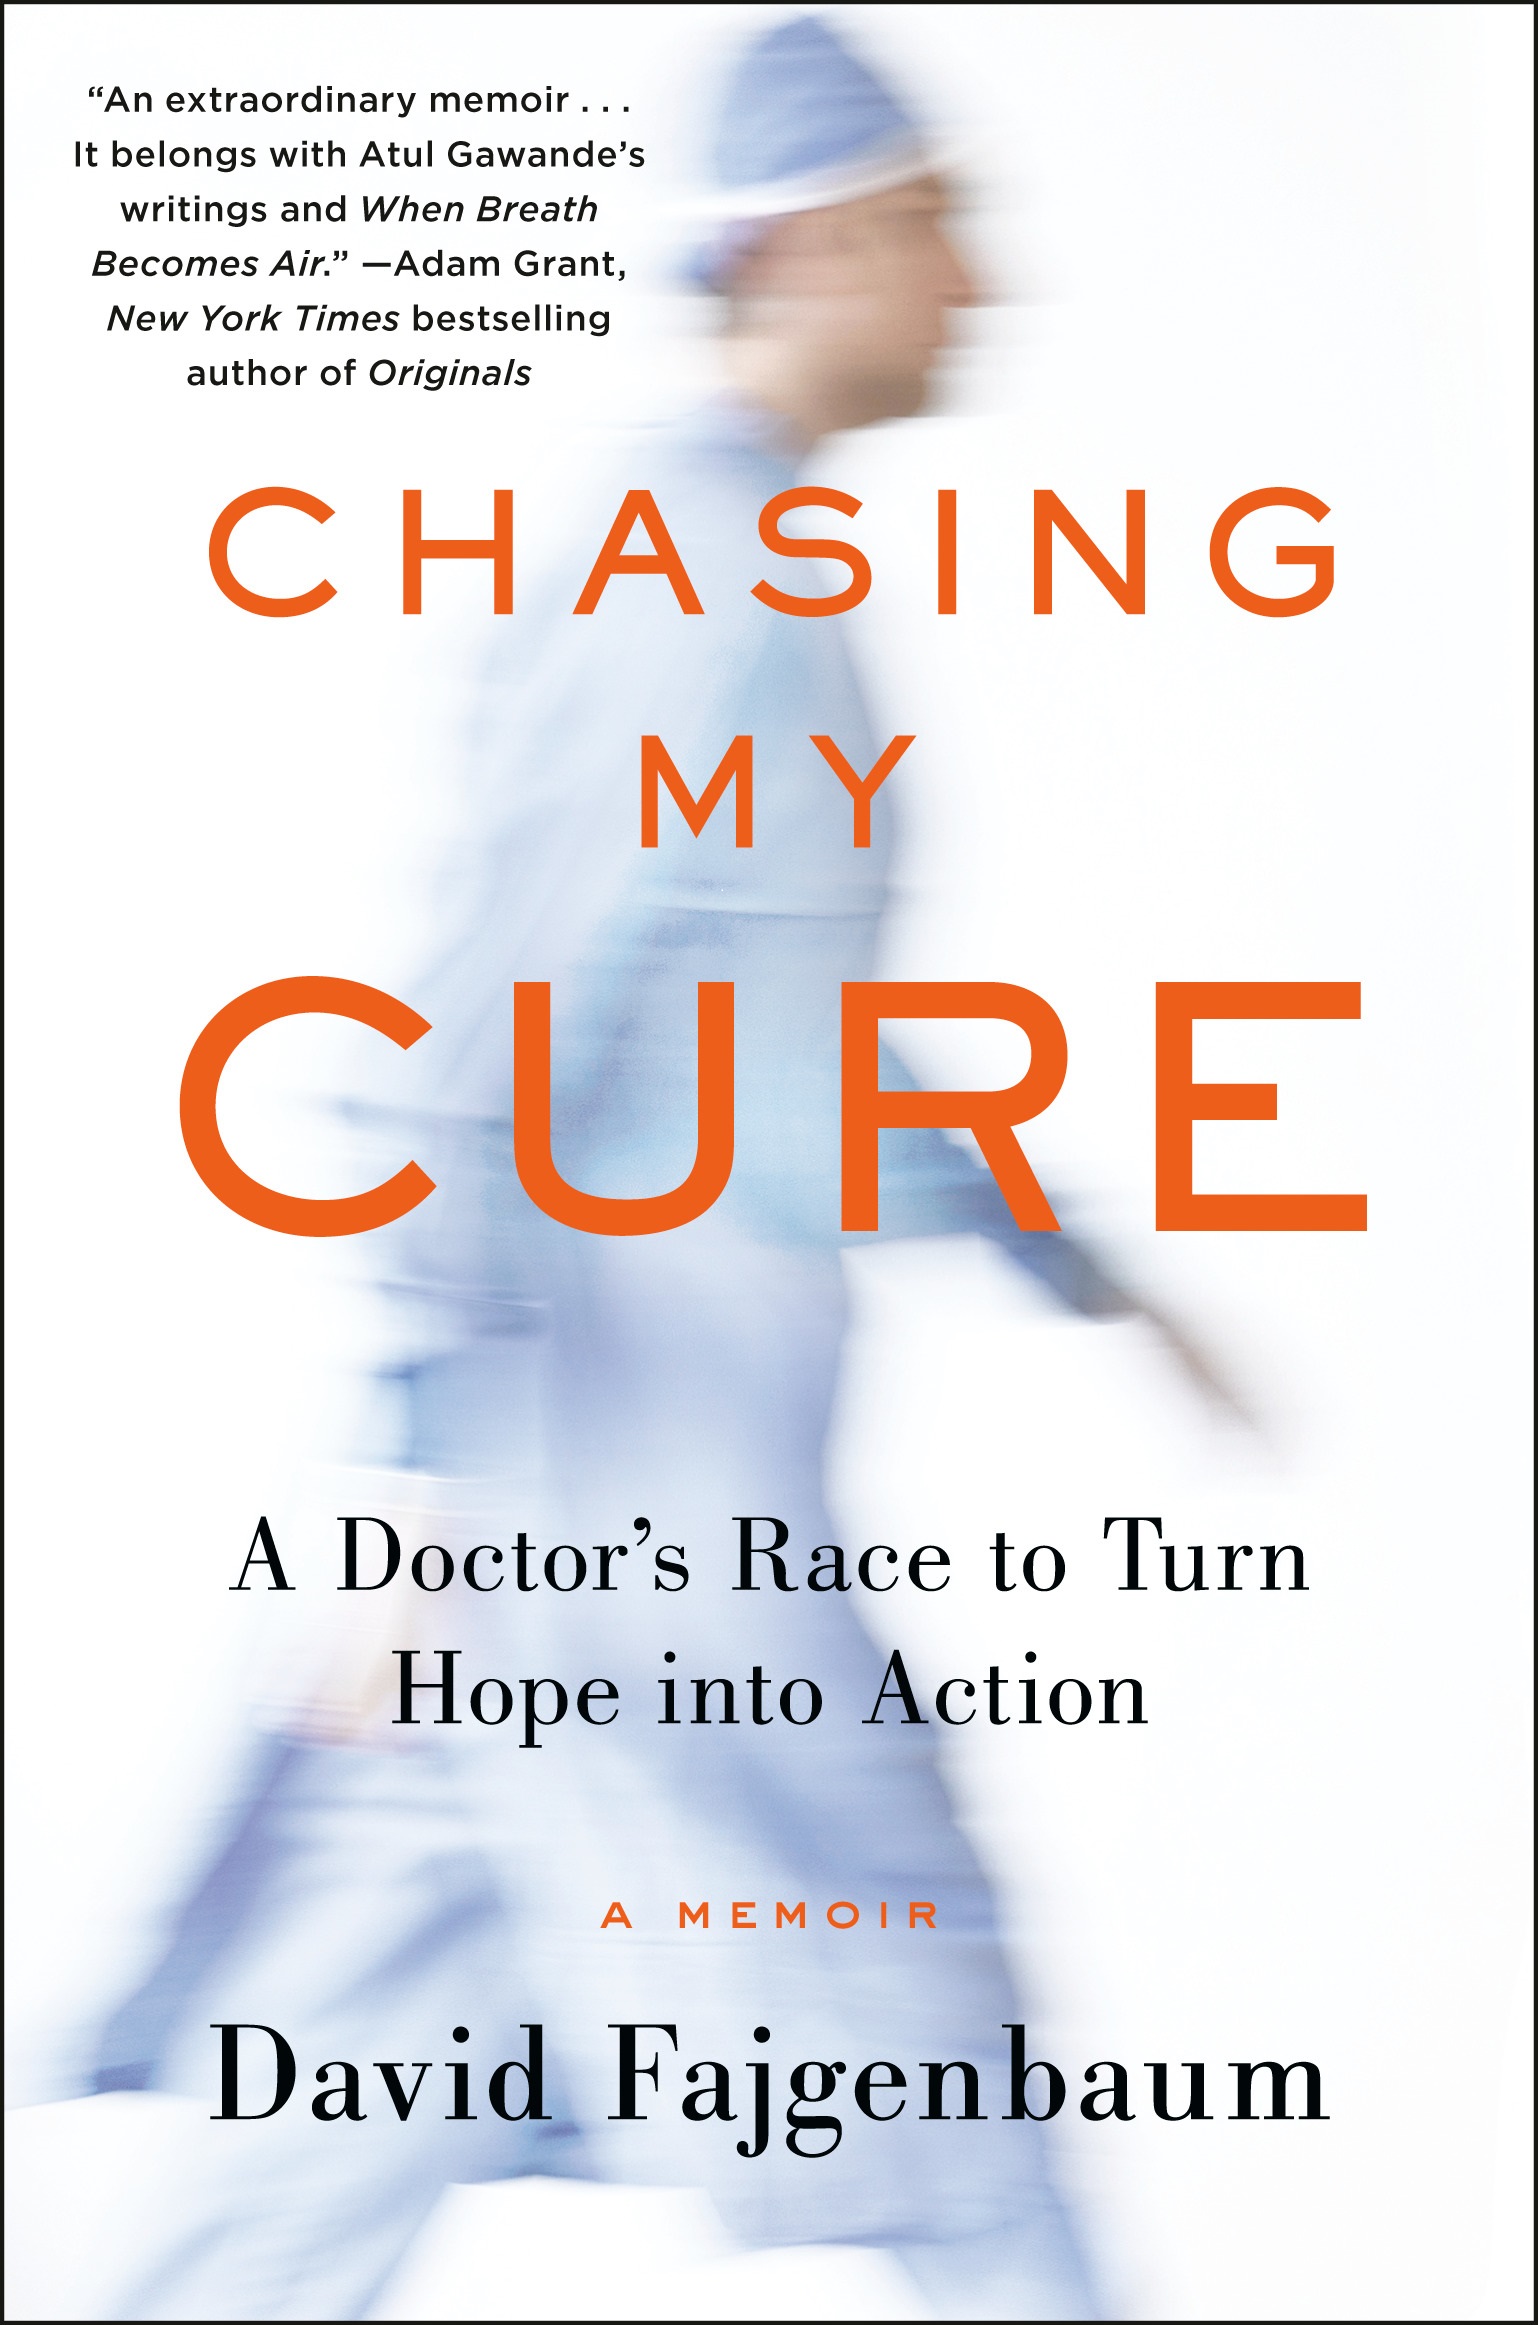 Book jacket with the words "Chasing My Cure: A Doctor's Race to Turn Hope Into Action. A Memoir."  by David Fajgenbaum